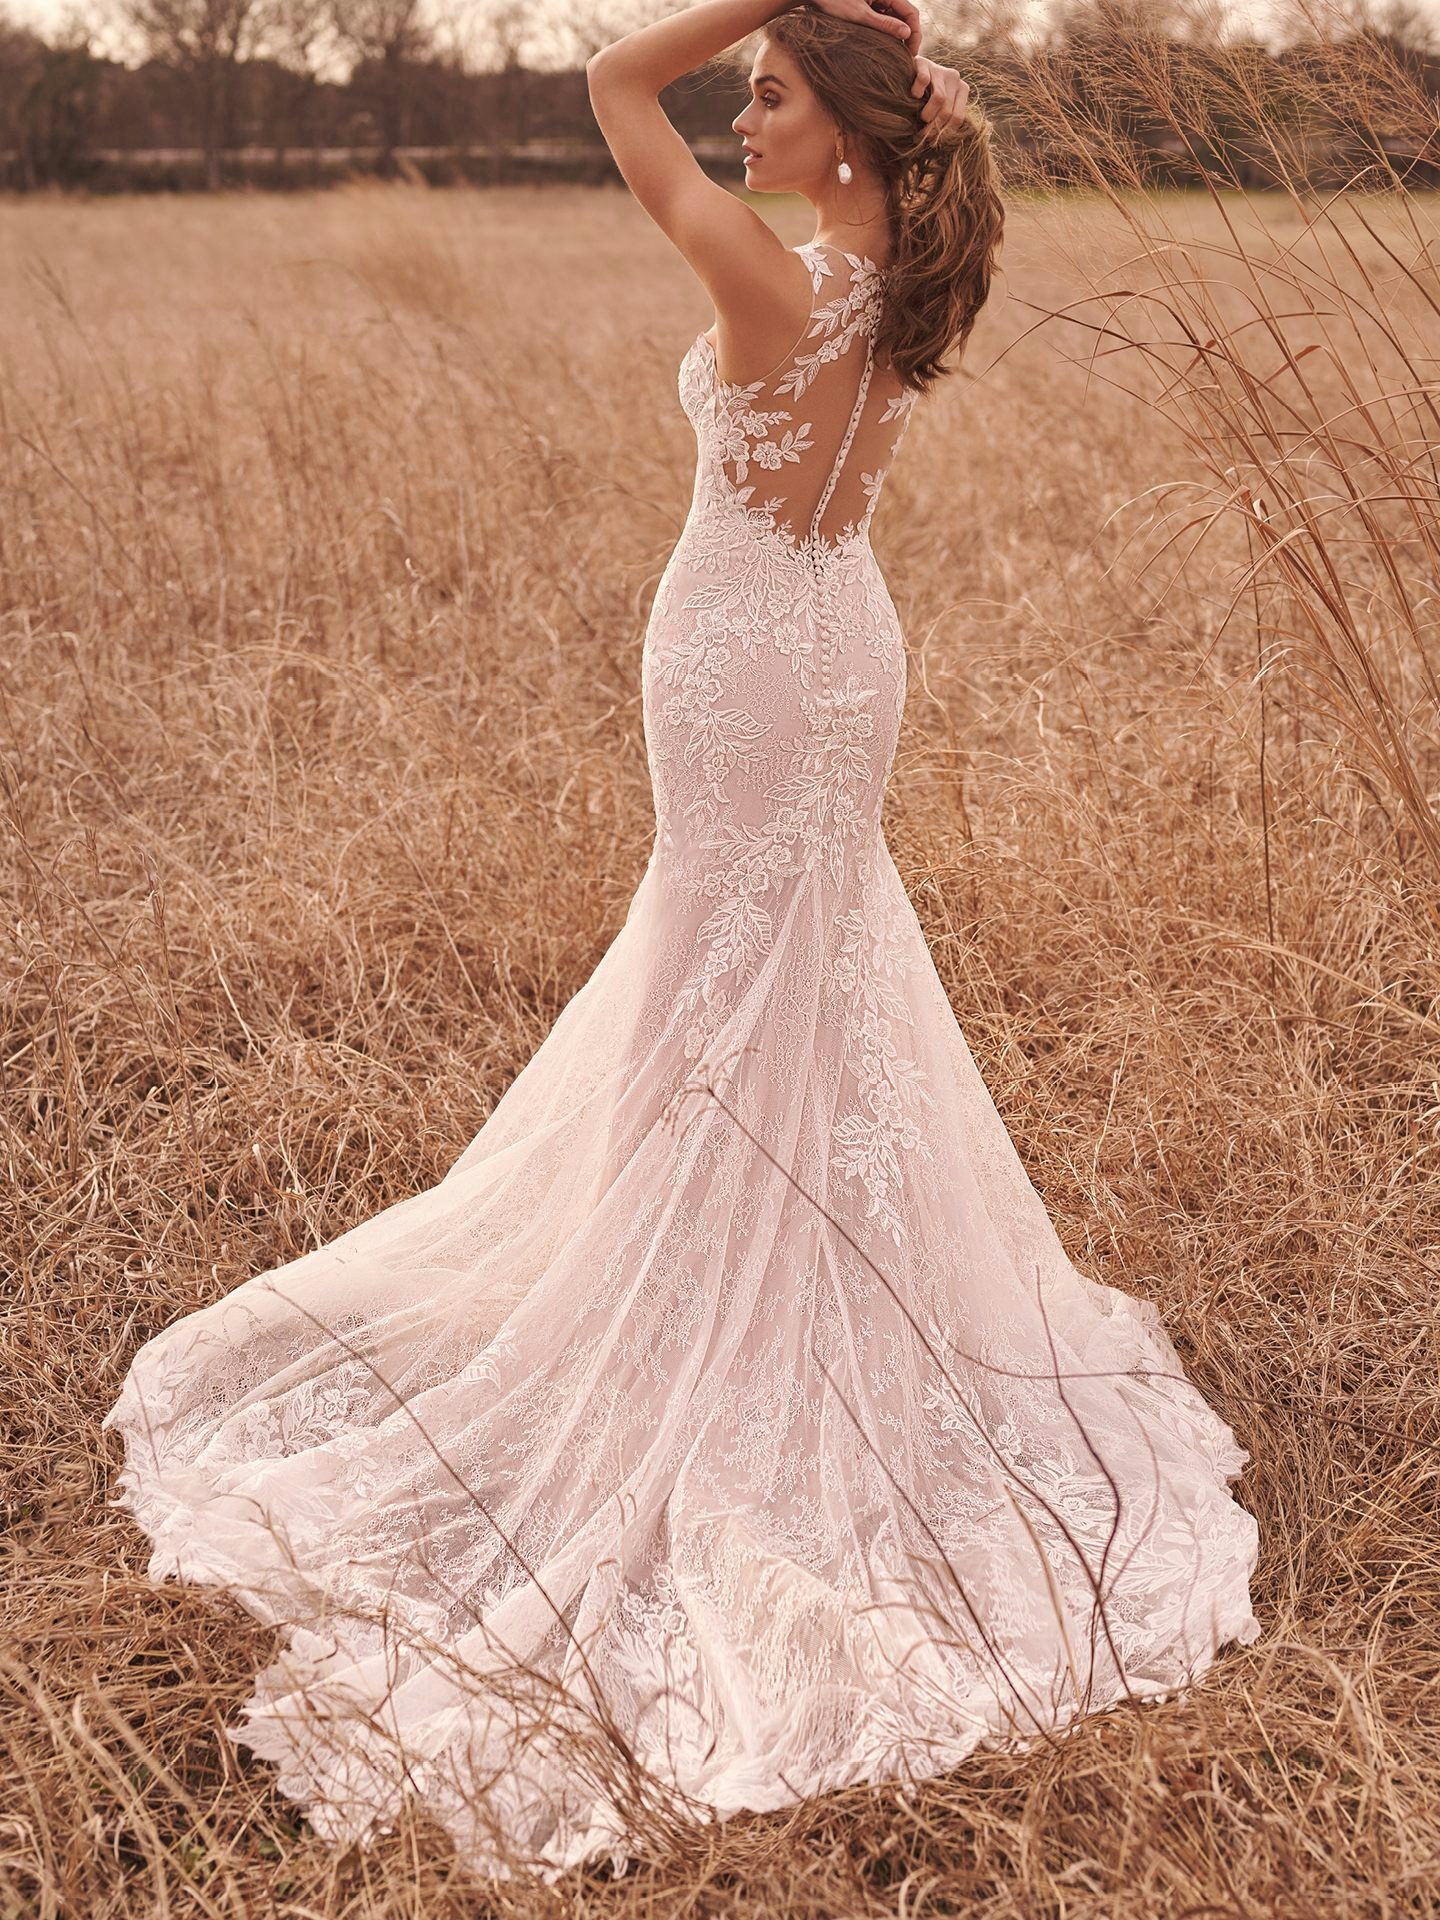 Off-White Wedding Dresses by Maggie ...